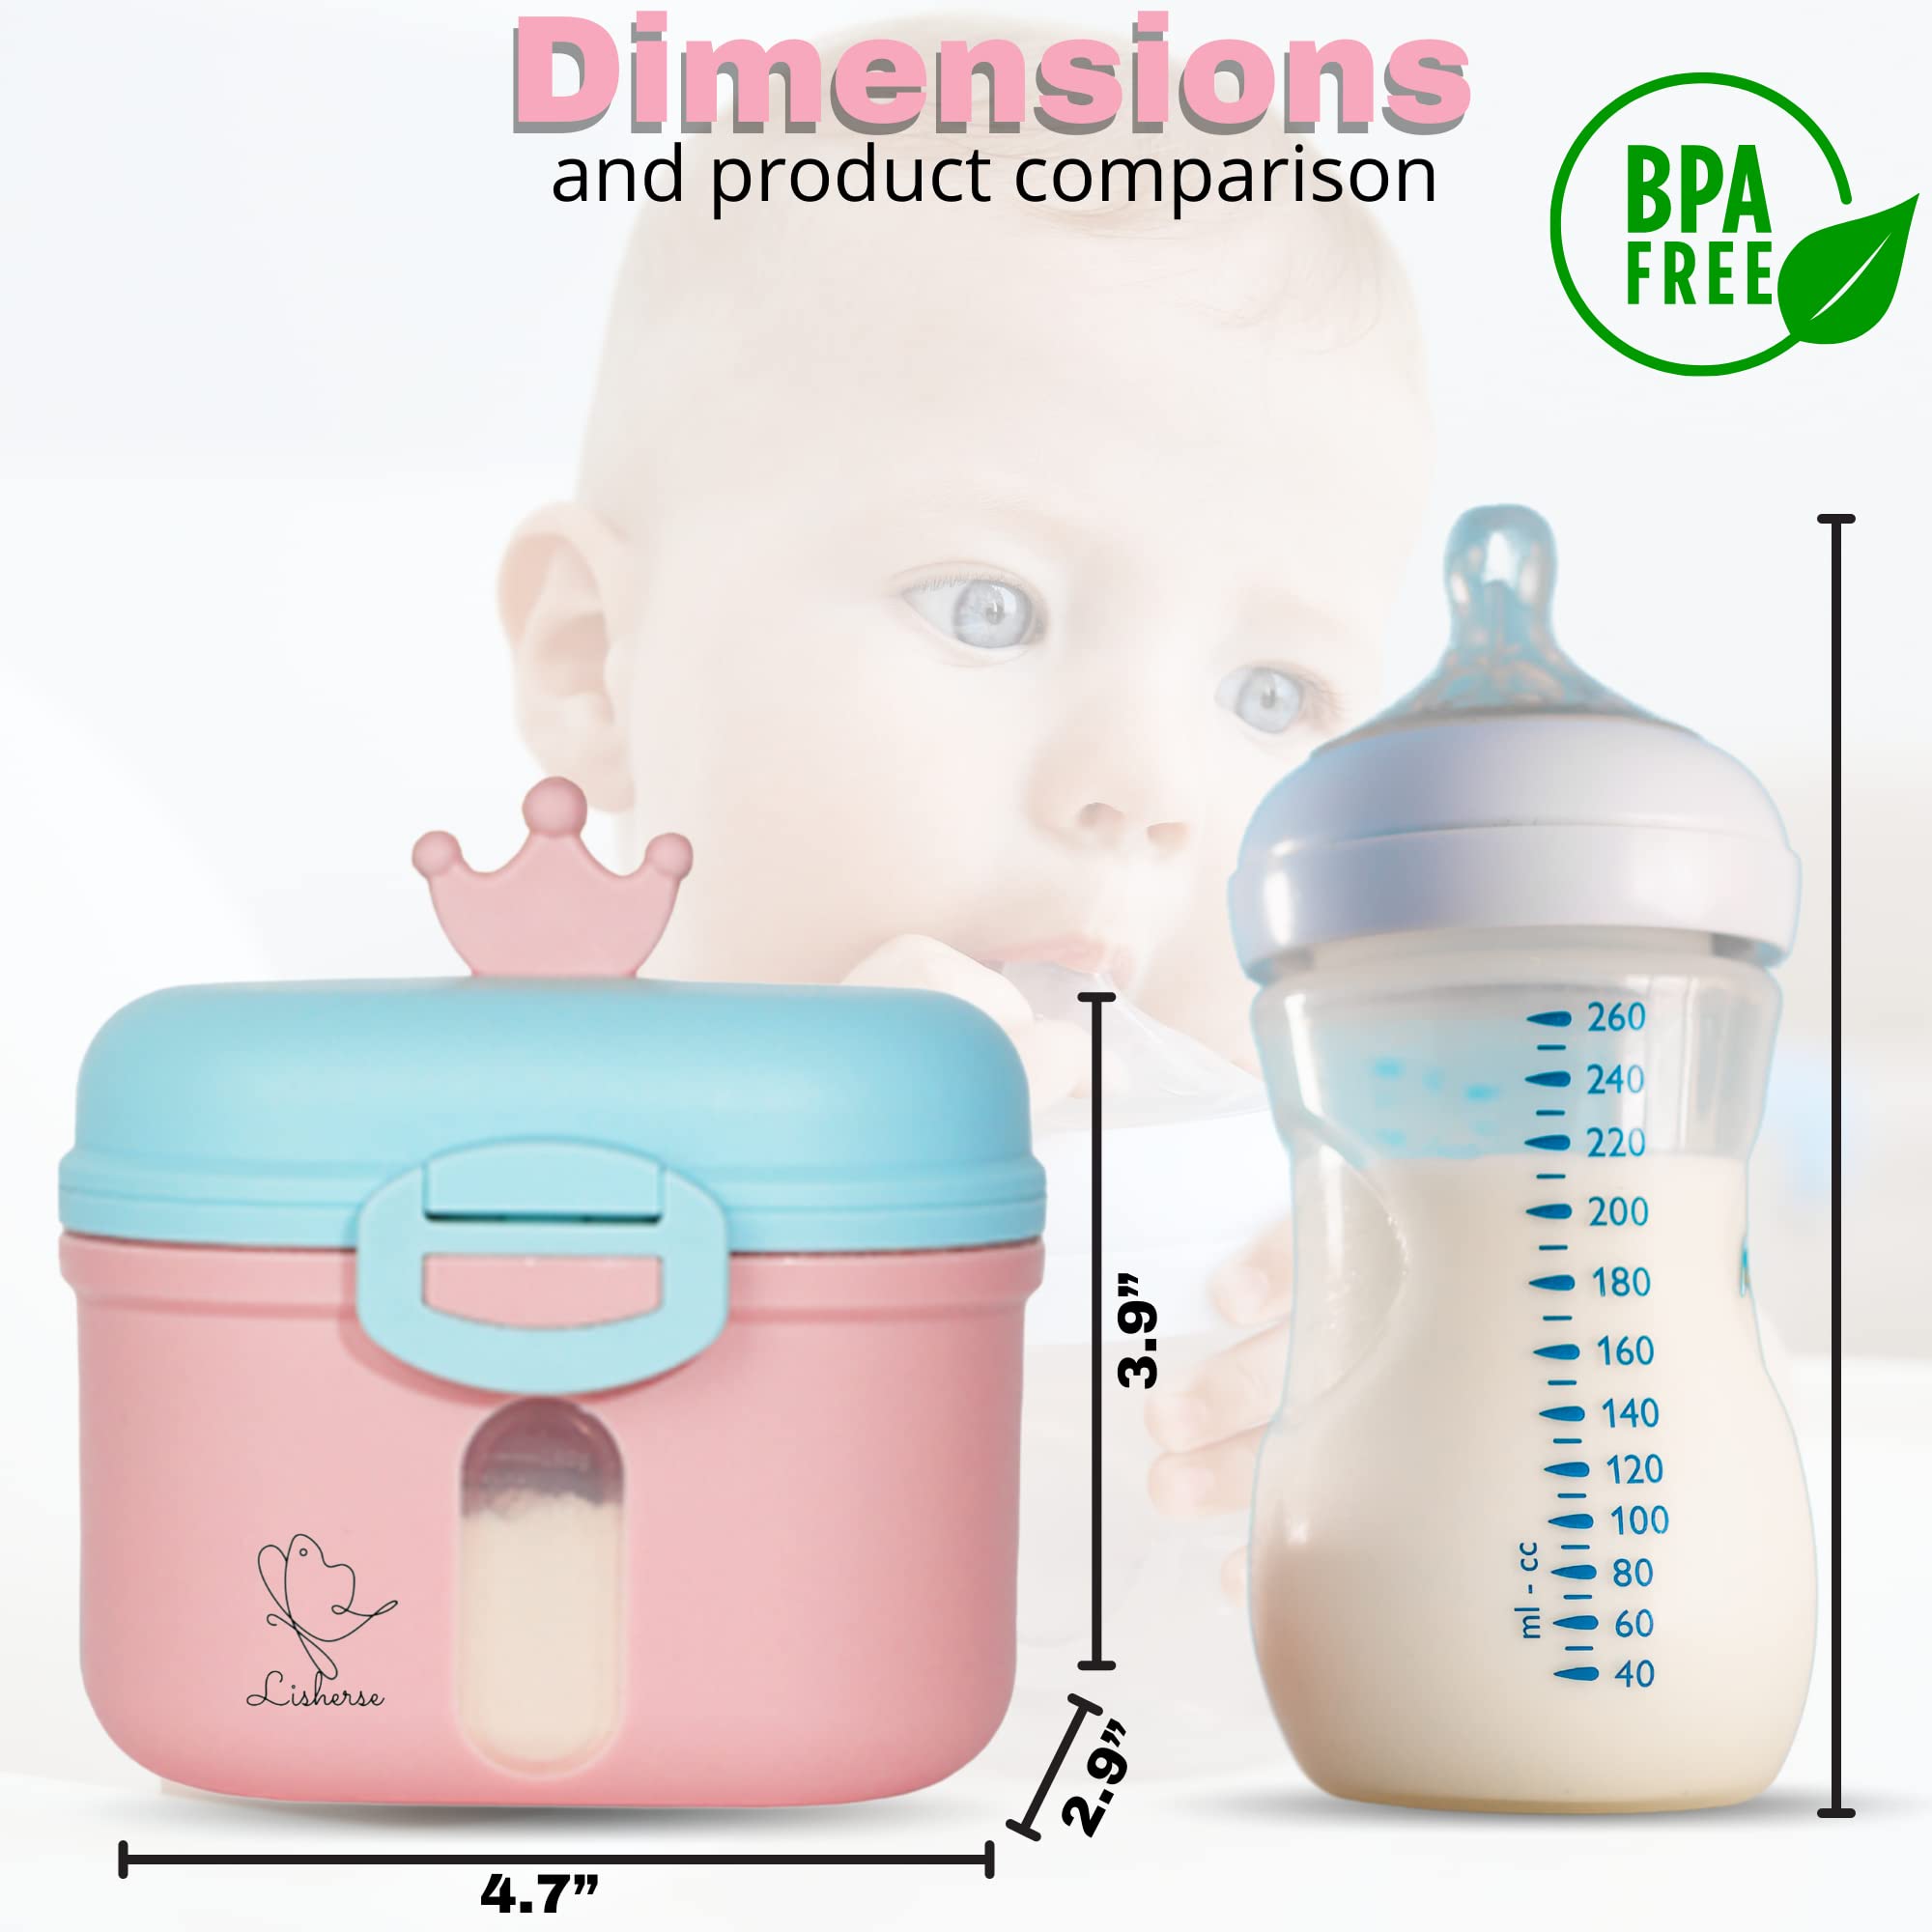 Baby Formula Container, Baby Formula Dispenser, Formula Container, Formula Dispenser on The go, Baby Formula Container for Travel, 8.46Z, 0.52LB, 240g, Includes a Multi-use Container, Pink